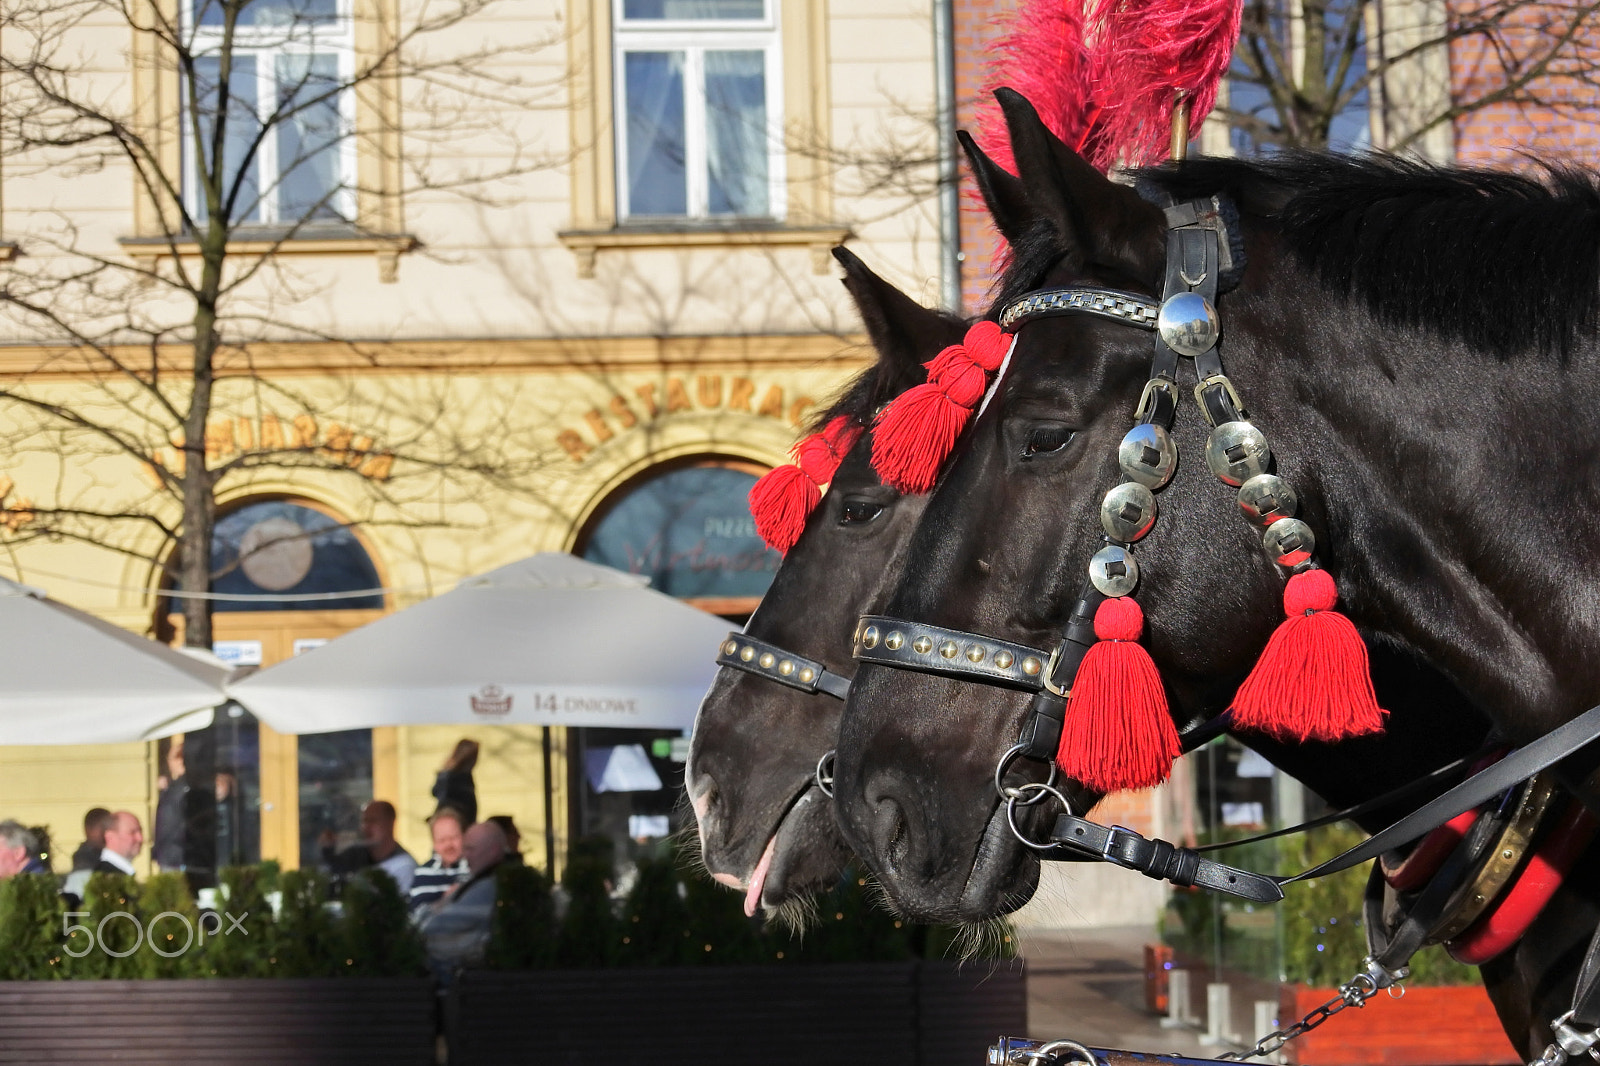 Nikon 1 J5 sample photo. Horse drawn carriages in krakow photography